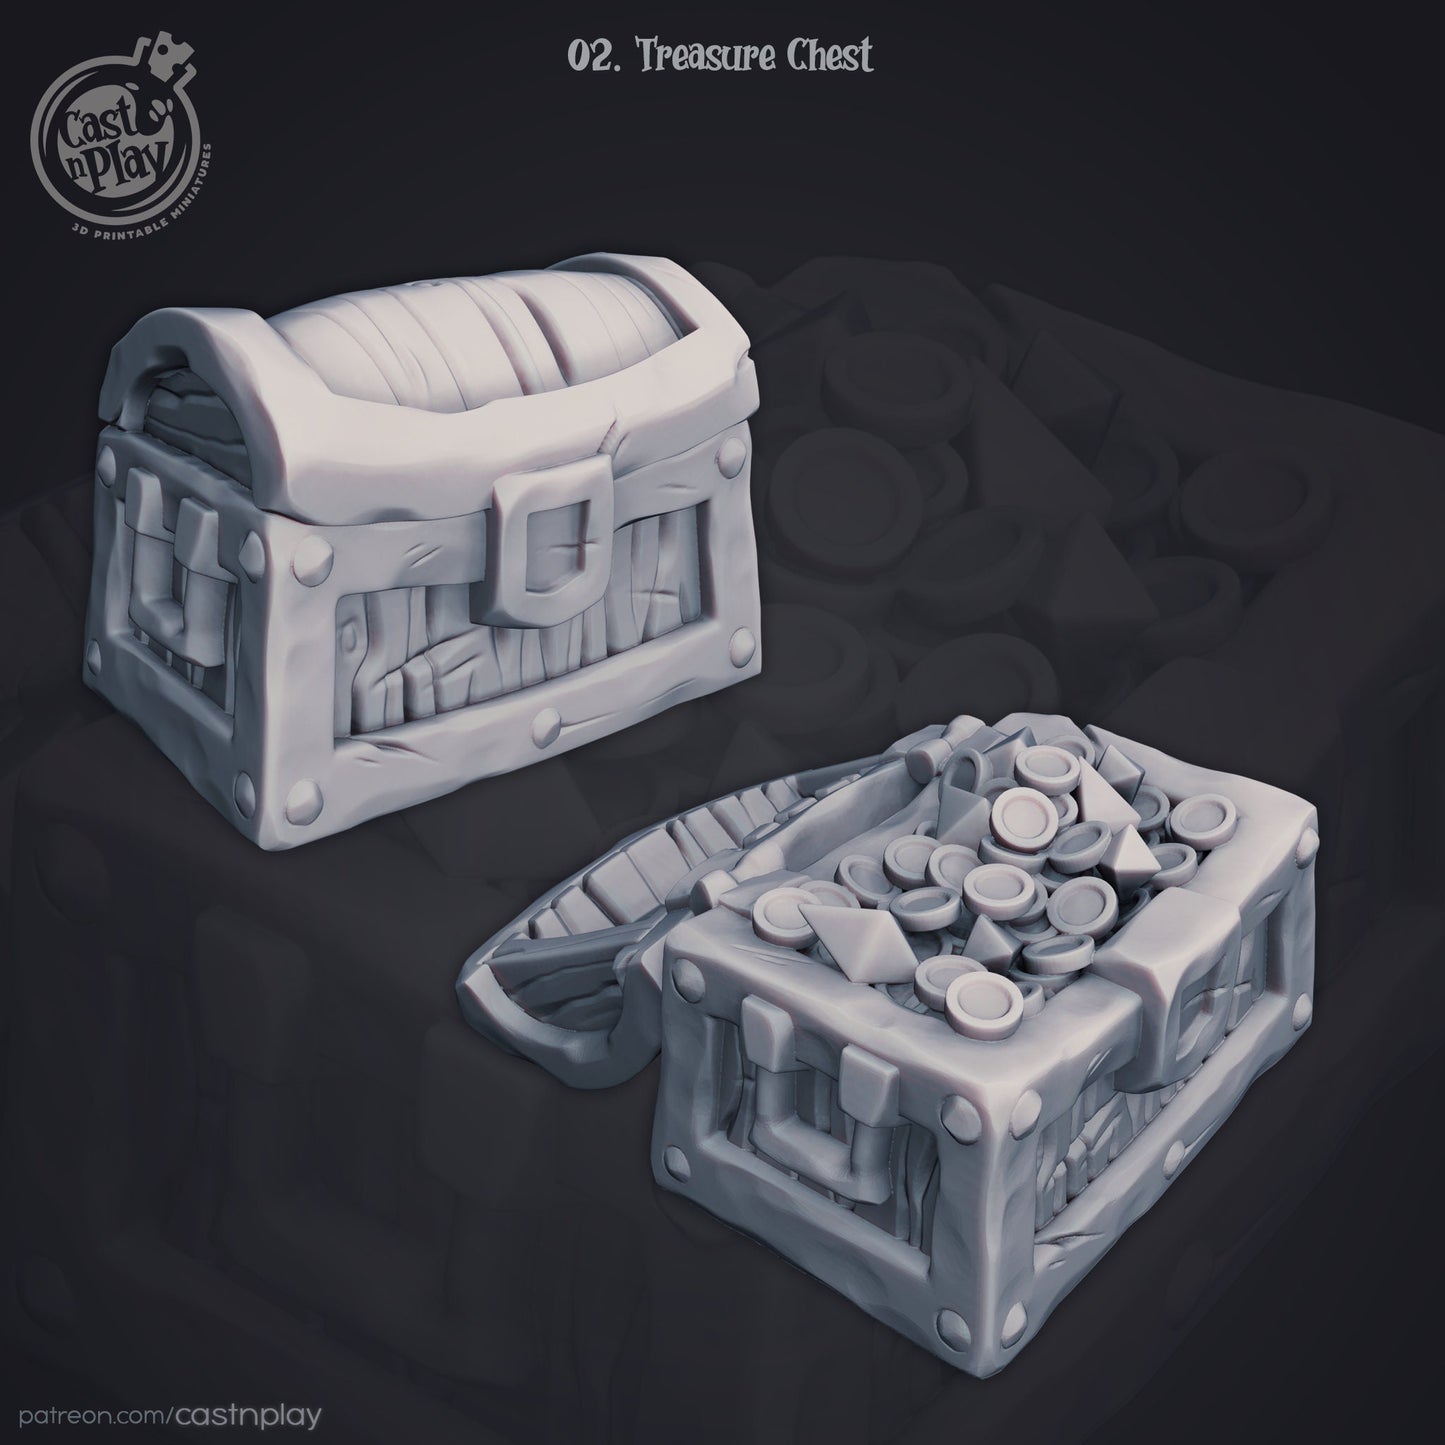 TREASURE CHEST, by Cast n Play // 3D Print on Demand / D&D / Pathfinder / RPG